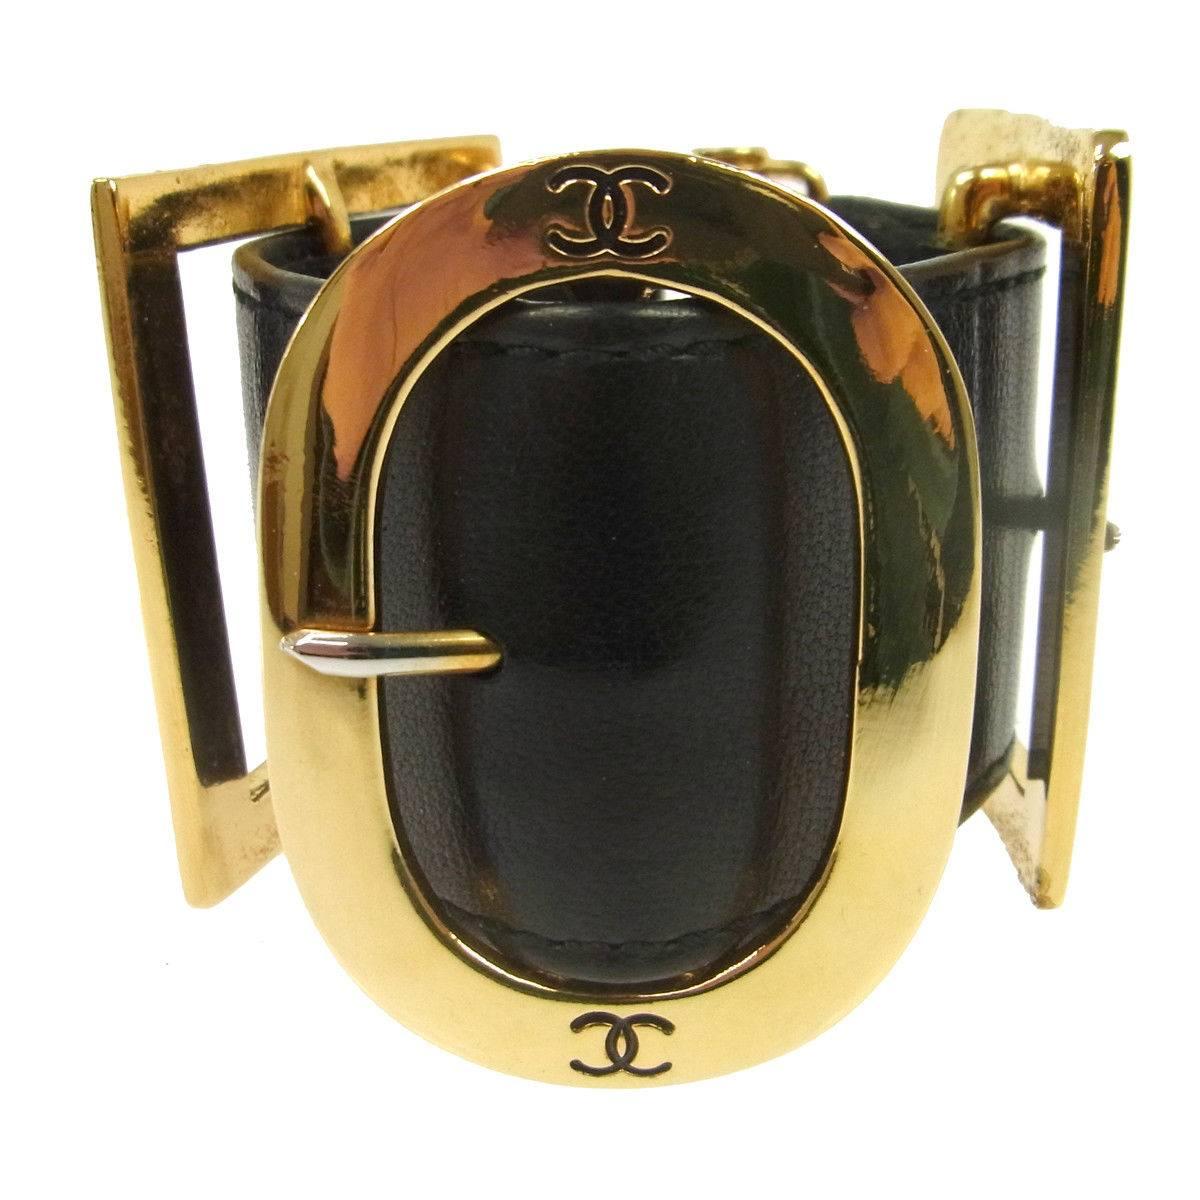 Chanel Black Leather Gold Buckle Evening Charm Cuff Bracelet in Box

Leather
Gold tone hardware
Slide bar closure 
Made in France
Width 1